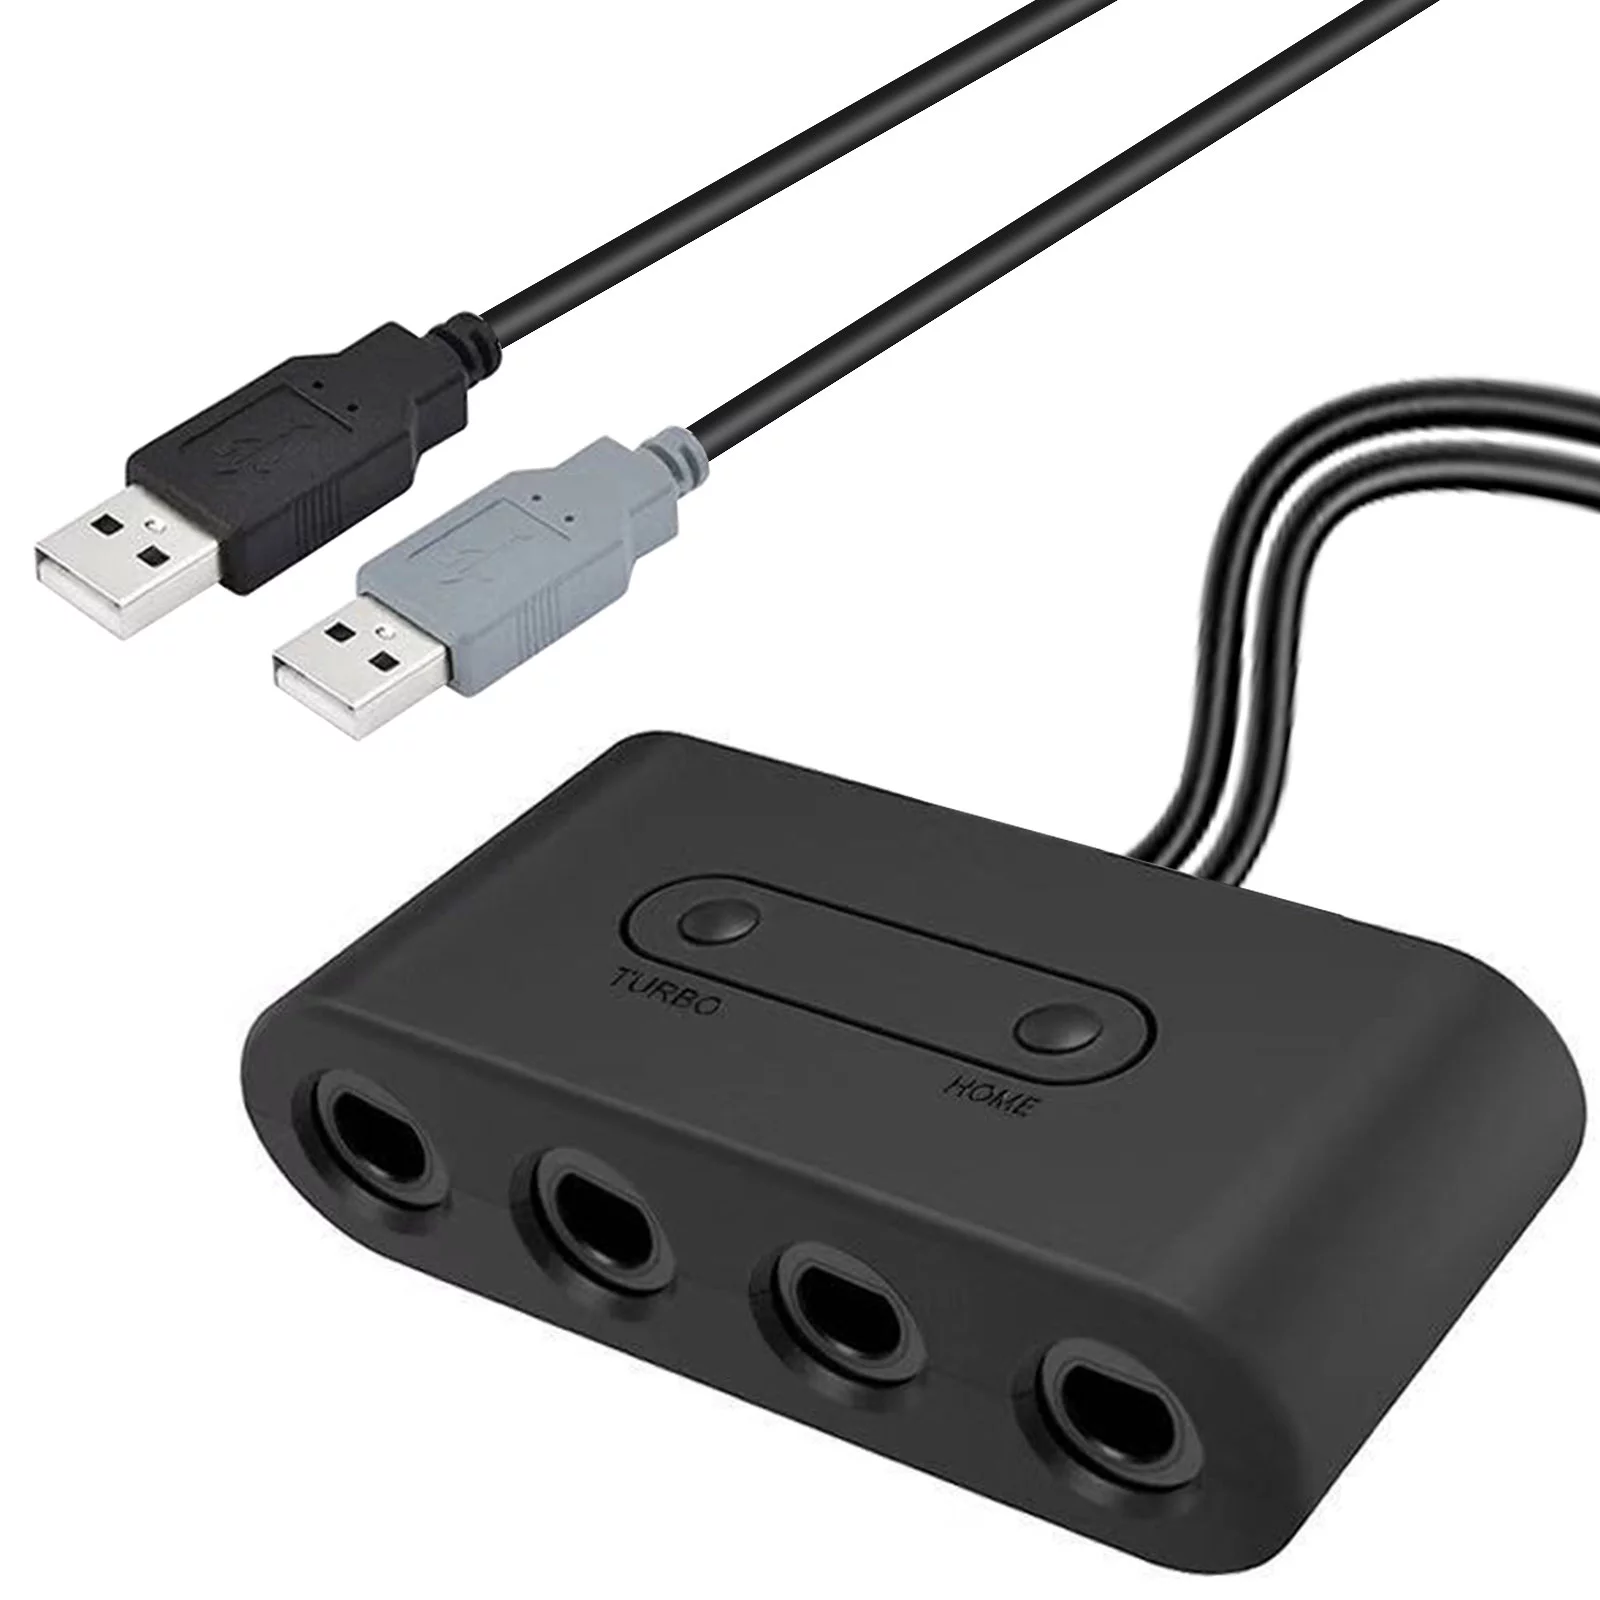 How To Use Gamecube Adapter For Pc